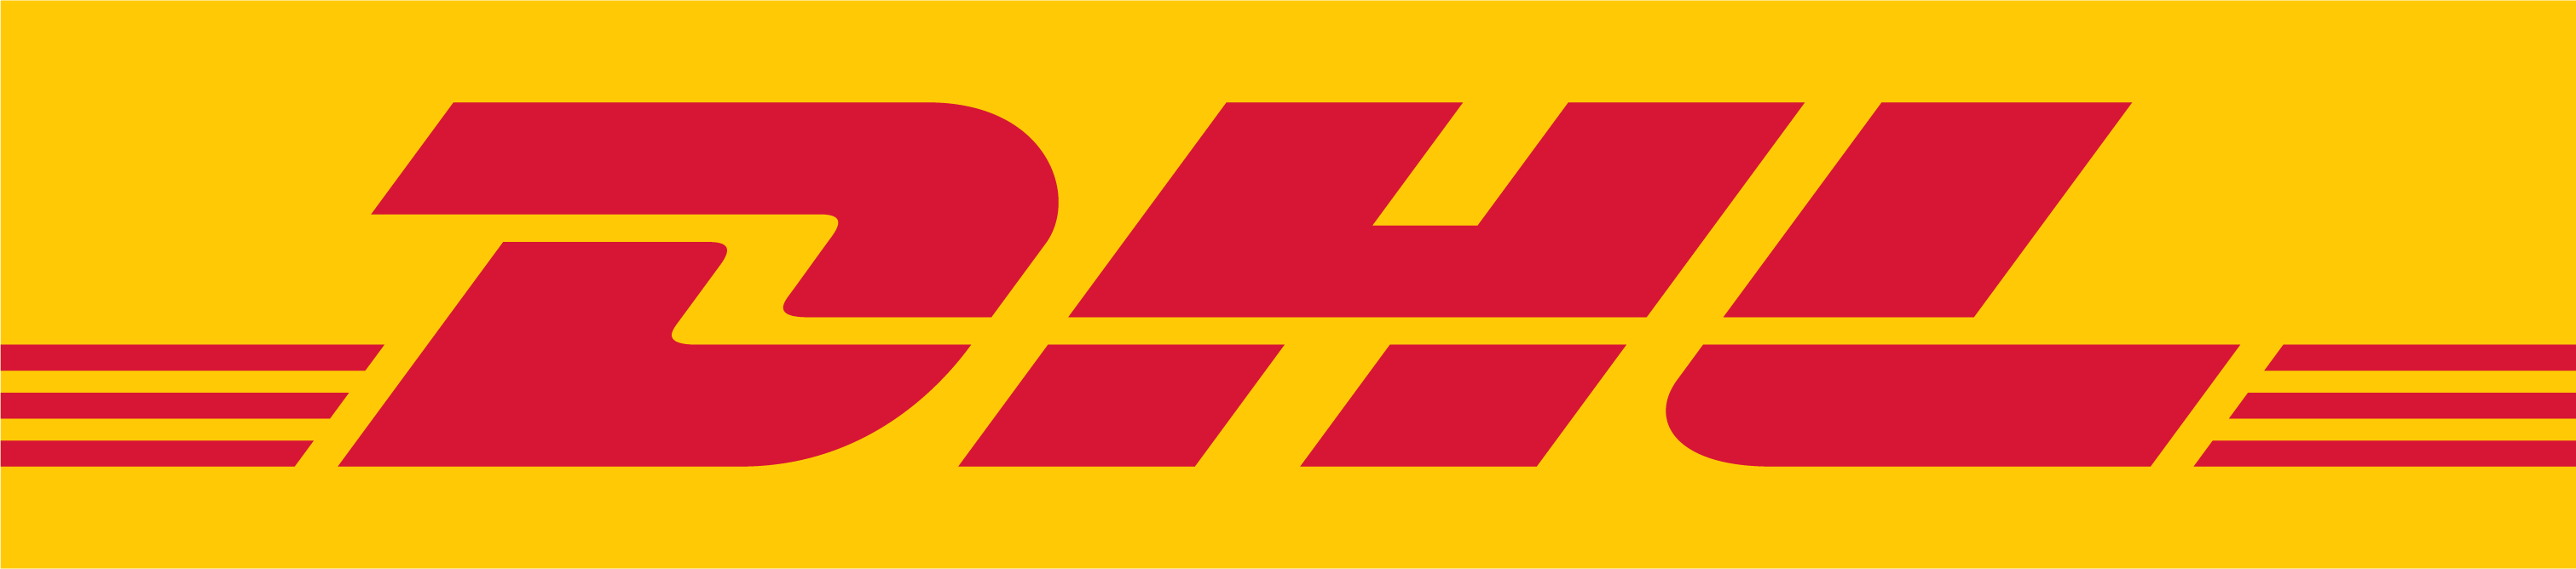 DHL Shipping Services, pickup & drop off  at all Goodman Packing & Shipping locations